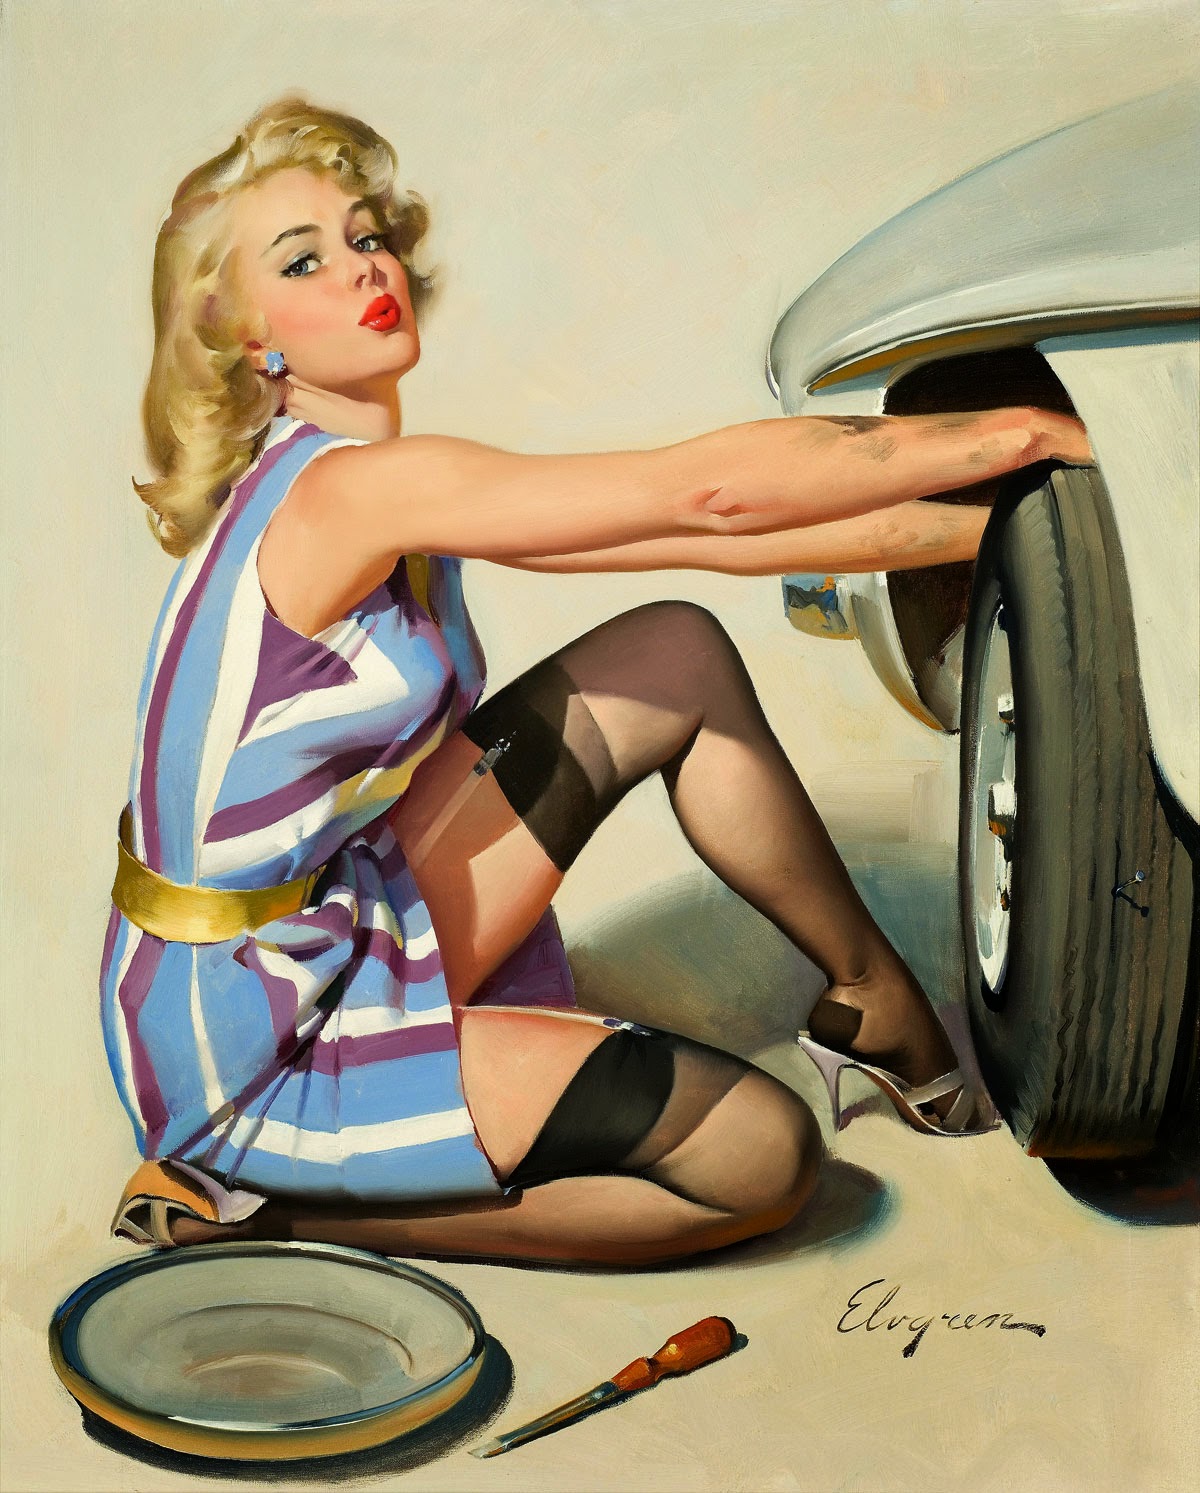 History of Pinups: Cheesecake - from Gibson to Jones.